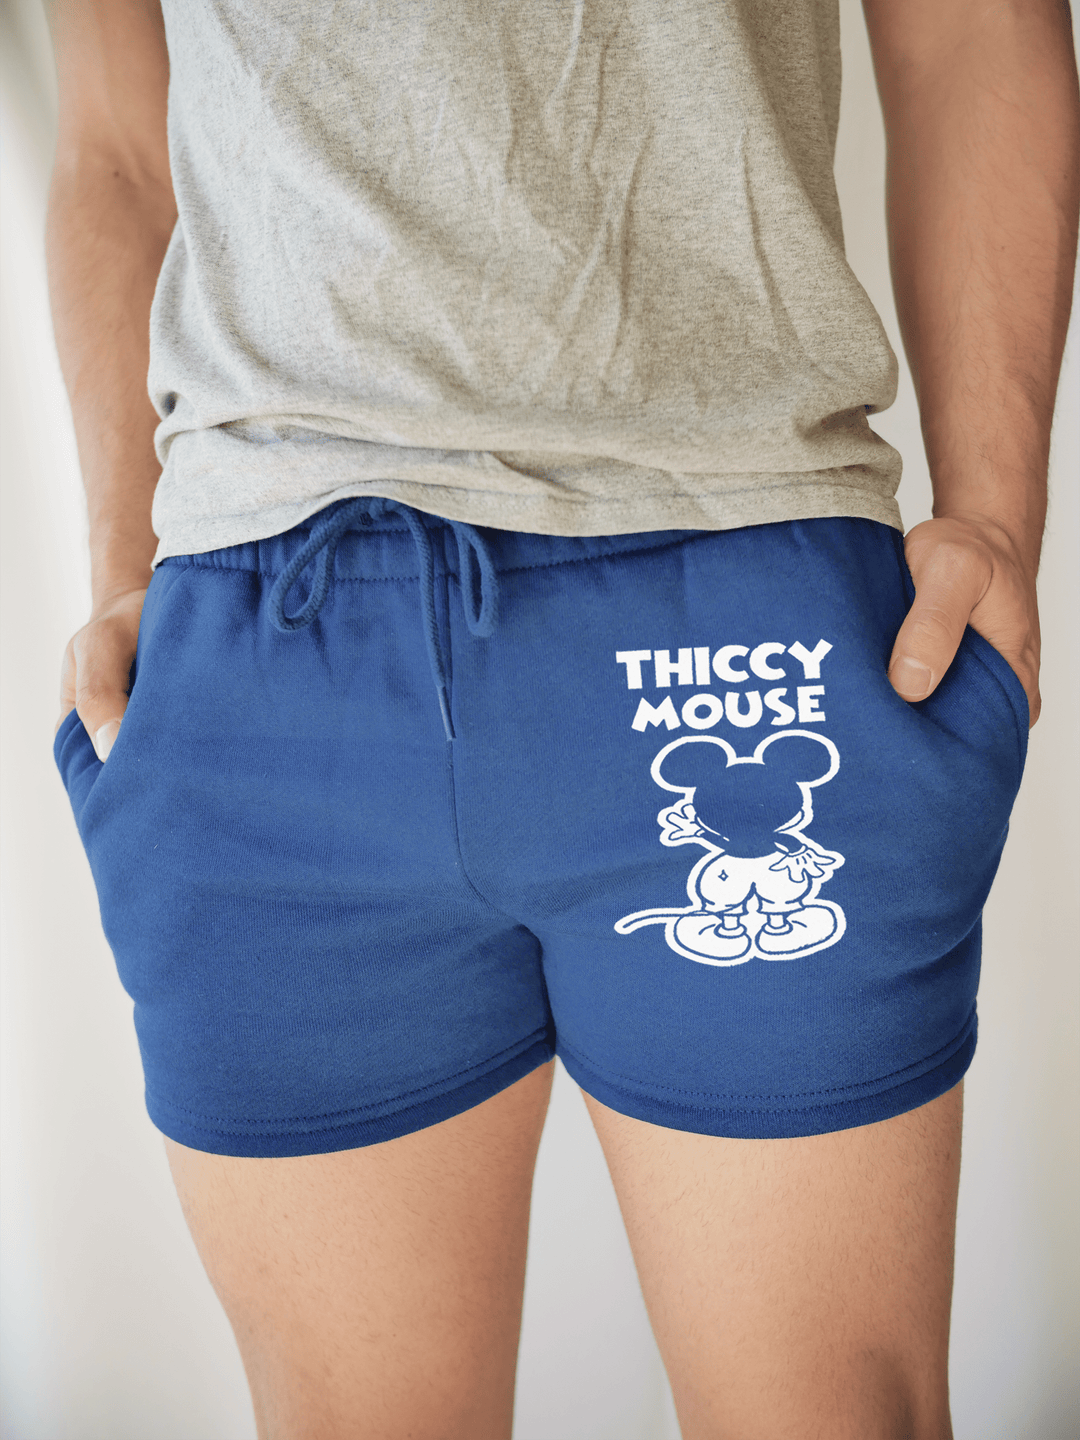 PixelThat Punderwear Shorts Royal Blue / S / Front Thiccy Mouse Men's Gym Shorts